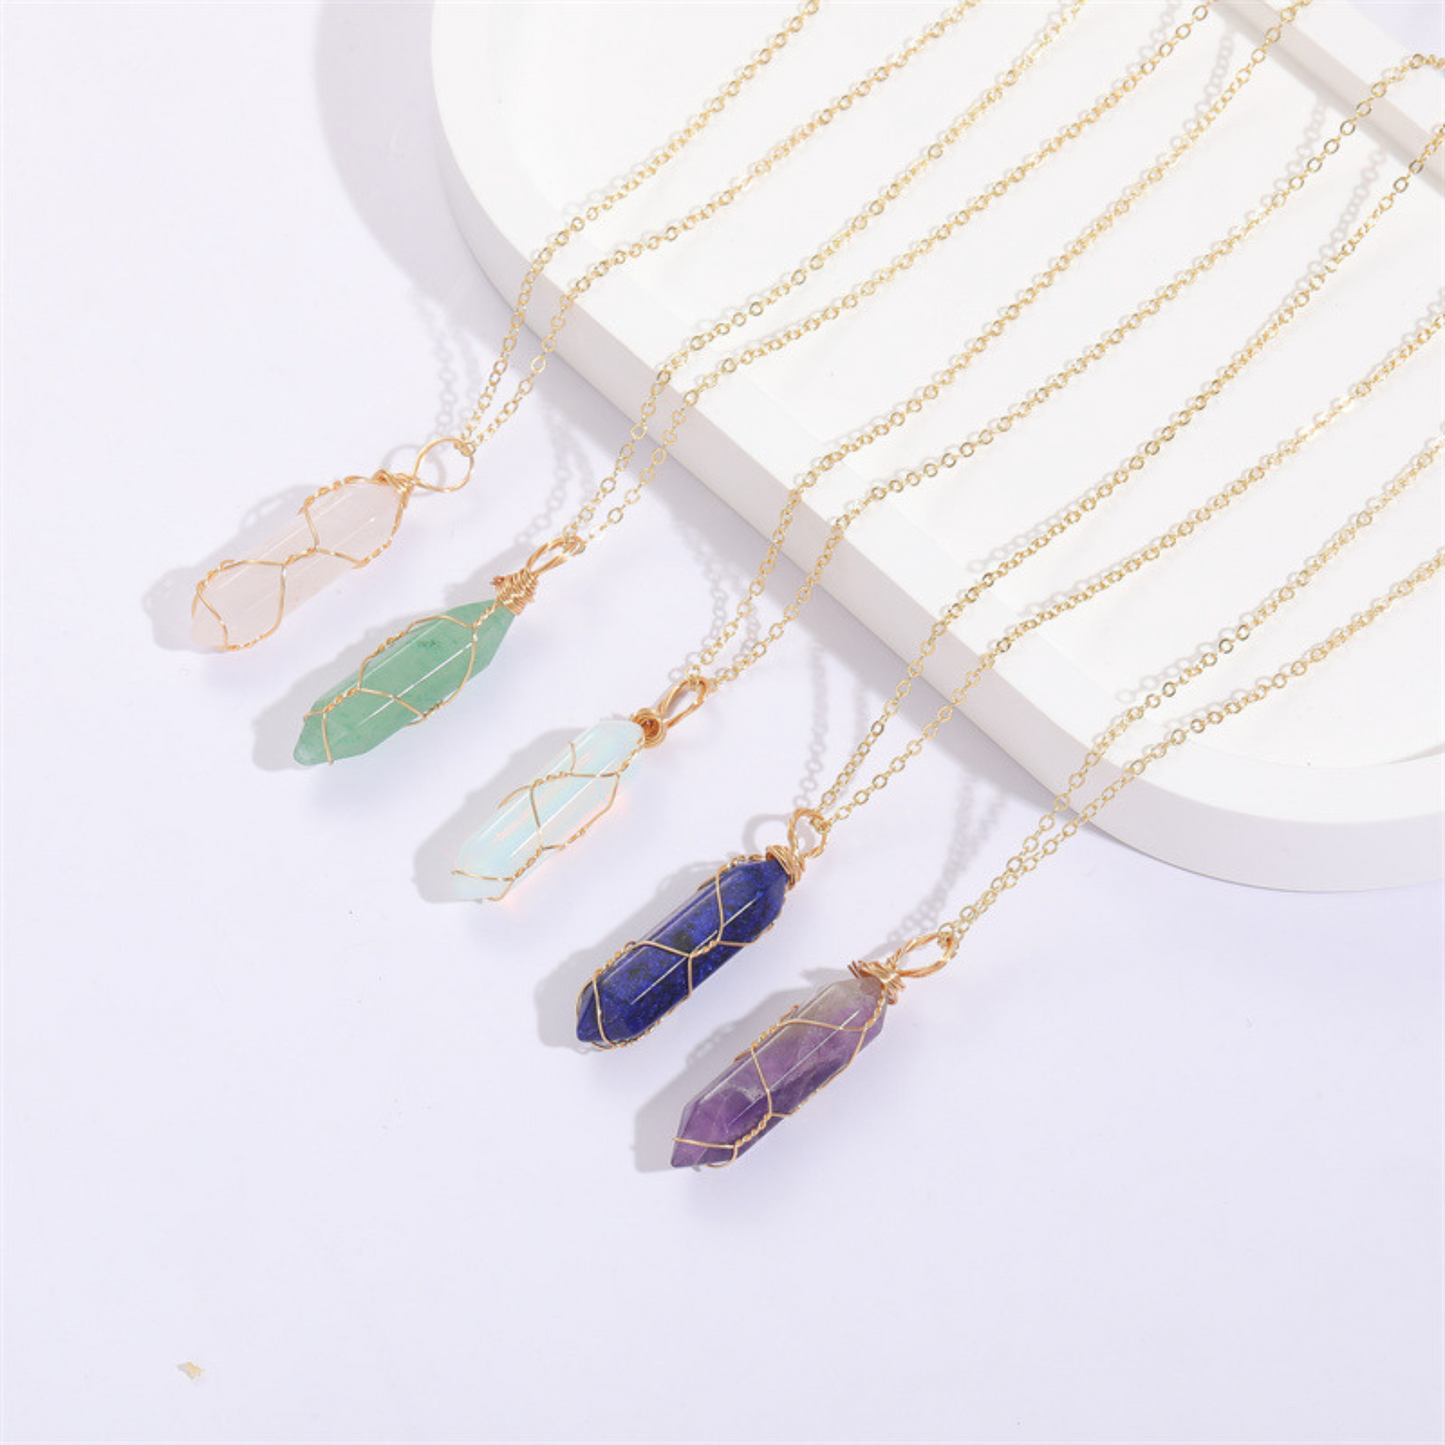 Minimalist Crystal Tower Pendant Necklace for Women